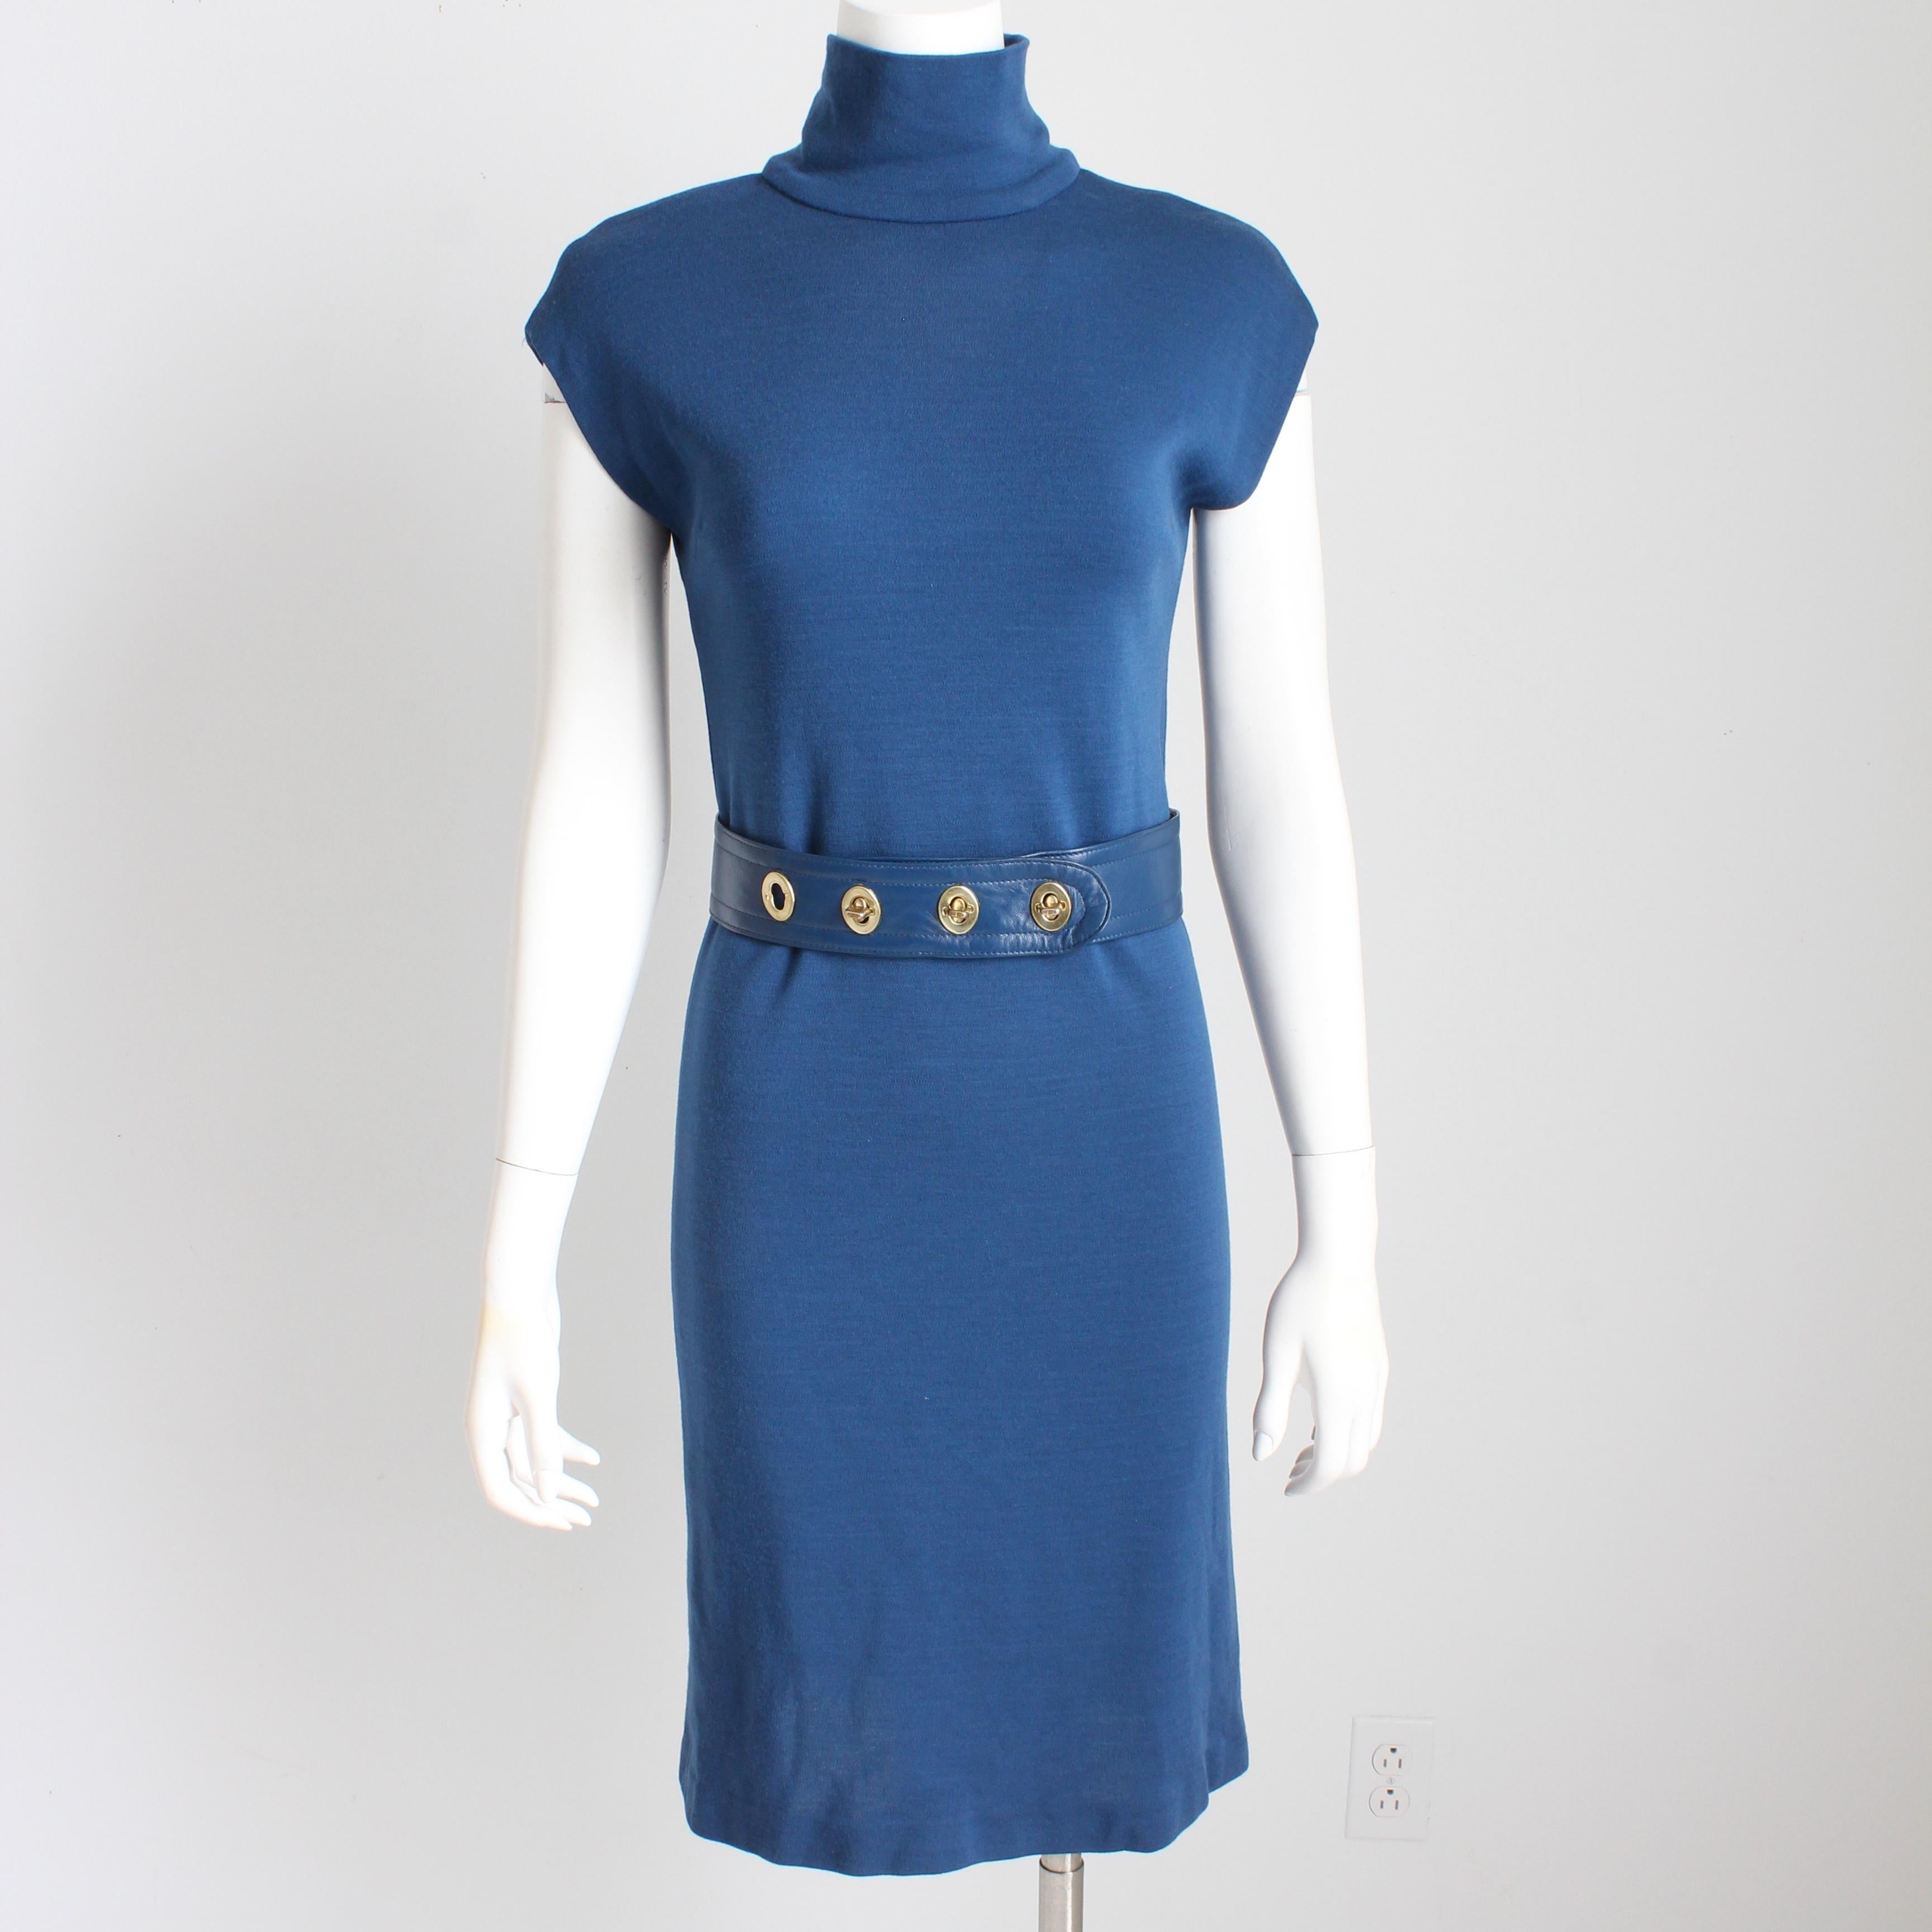 Authentic, preowned, vintage Bonnie Cashin for Sills blue knit turtleneck dress with matching blue leather turn lock belt, circa the 60s. Ultra mod! 

Made from a blueberry-hued wool jersey fabric, it features a high neck, cap sleeves and fastens in